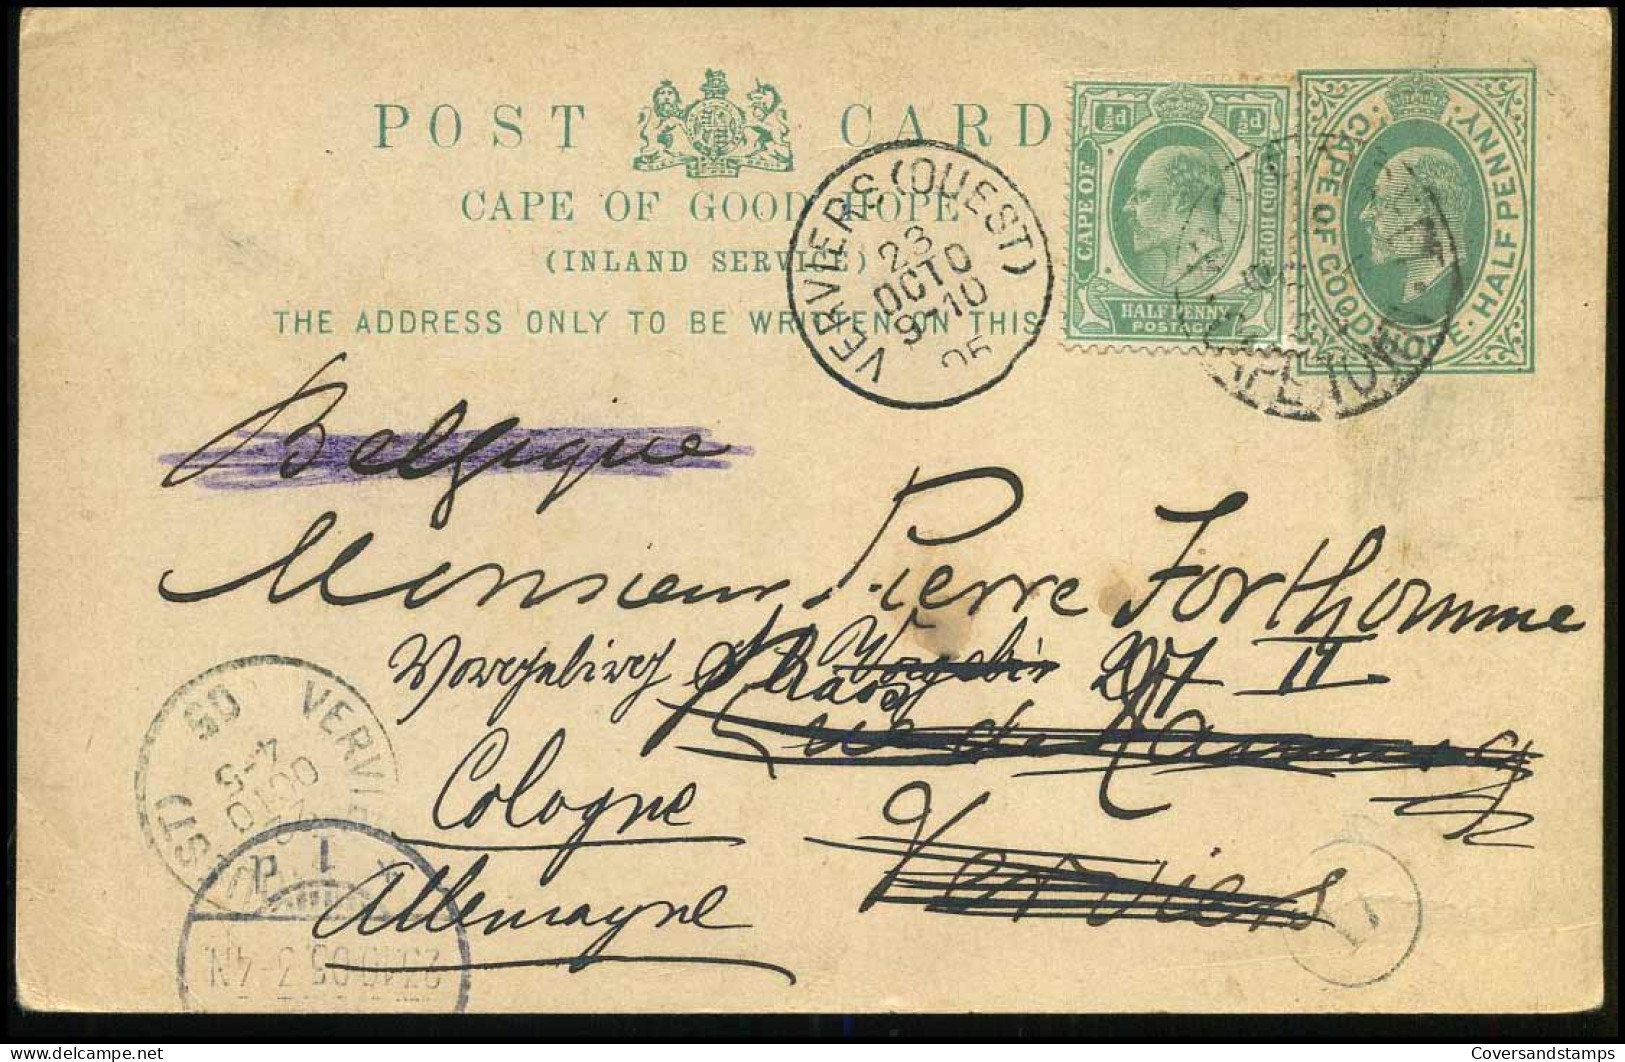 Post Card From Capetown To Verviers, Belgium, Redirected To Cologne, Germany In 1905 - Cape Of Good Hope (1853-1904)